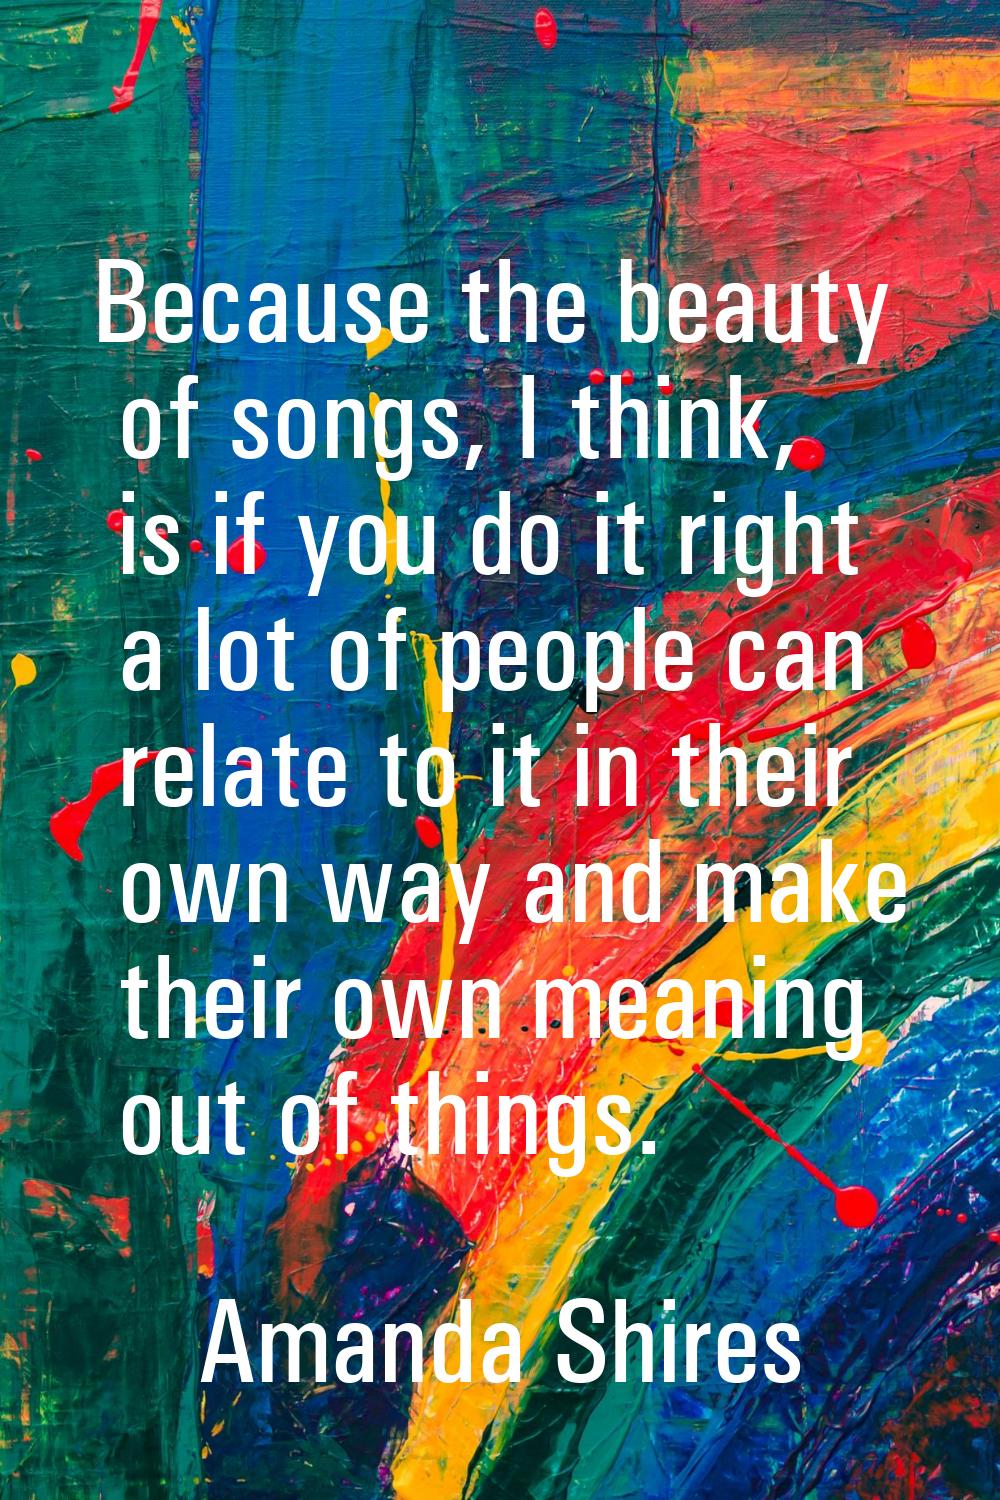 Because the beauty of songs, I think, is if you do it right a lot of people can relate to it in the